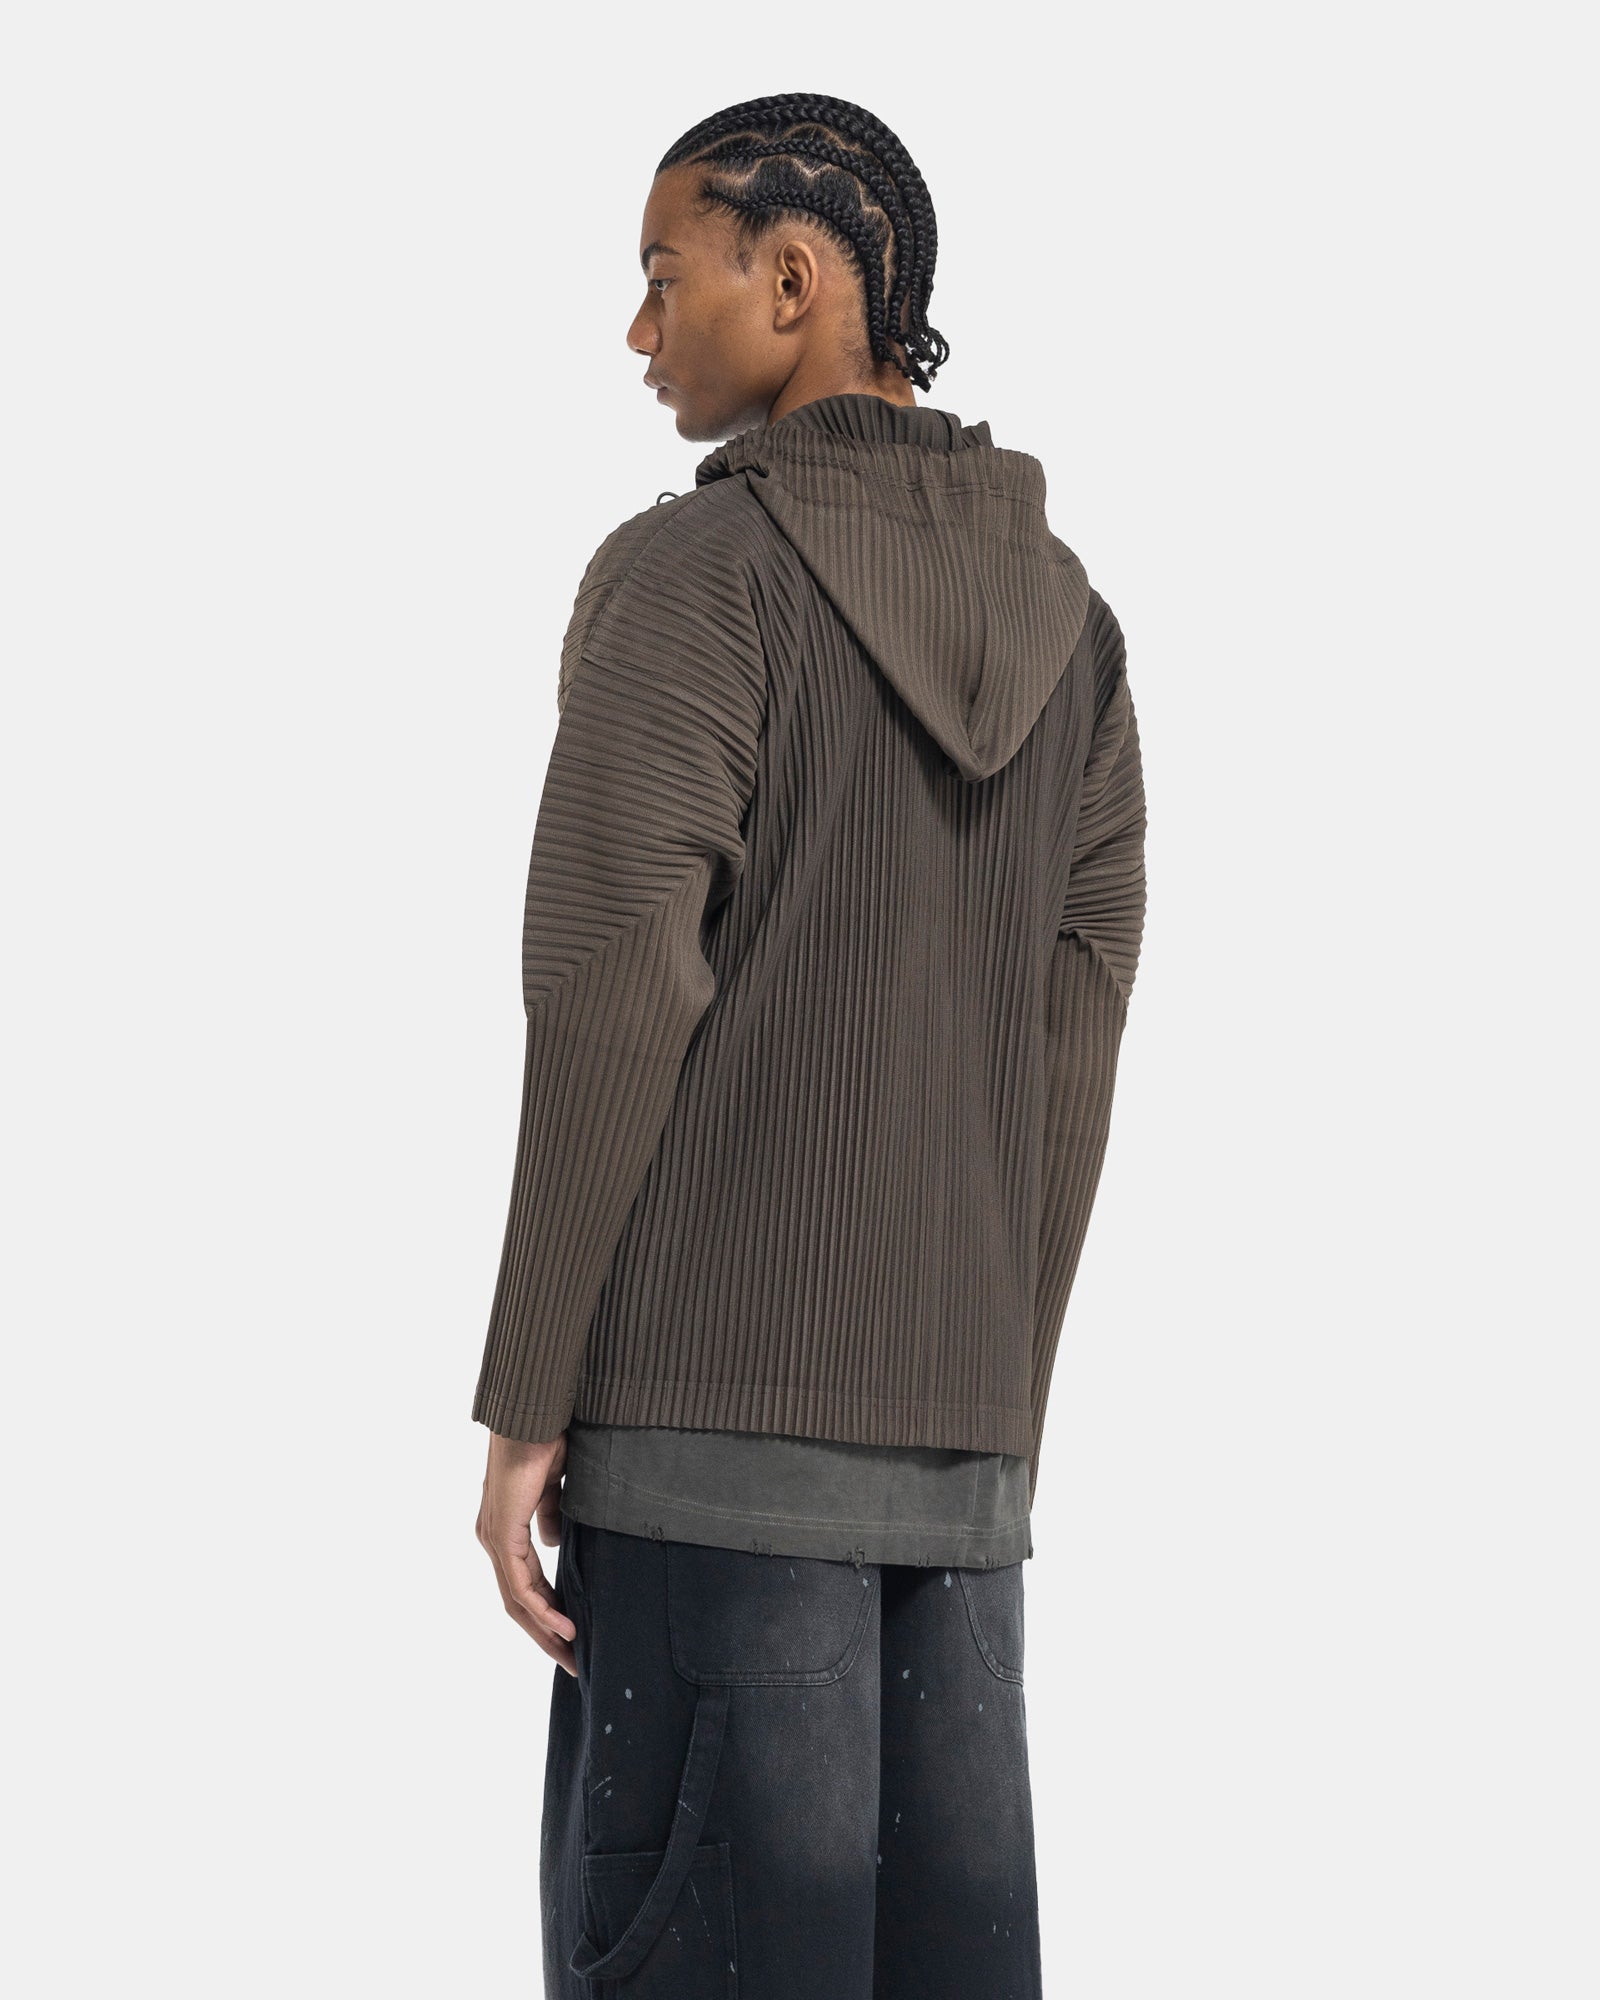 Male model wearing issey miyake homme plissé green pleated hoodie on white background